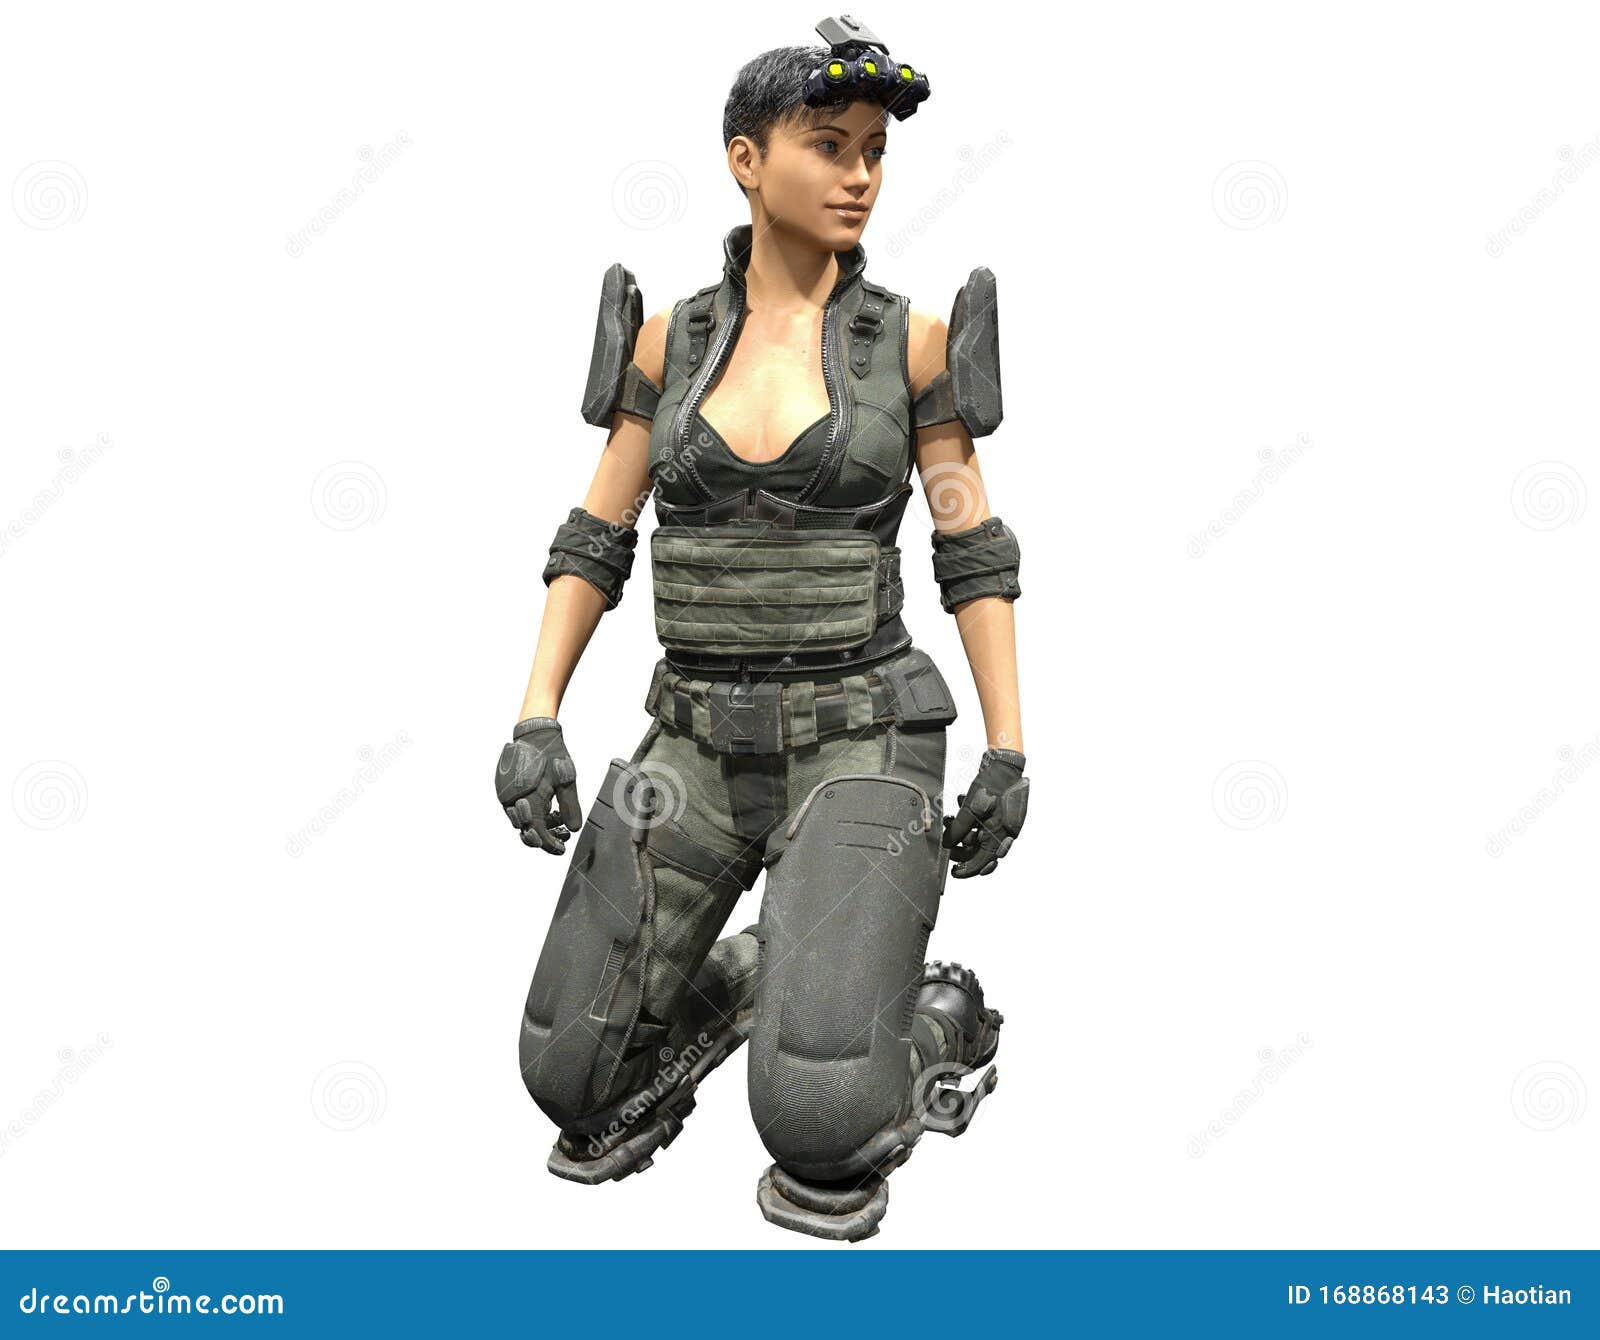 https://thumbs.dreamstime.com/z/d-render-sexy-special-forces-female-soldier-tactical-strike-armor-168868143.jpg